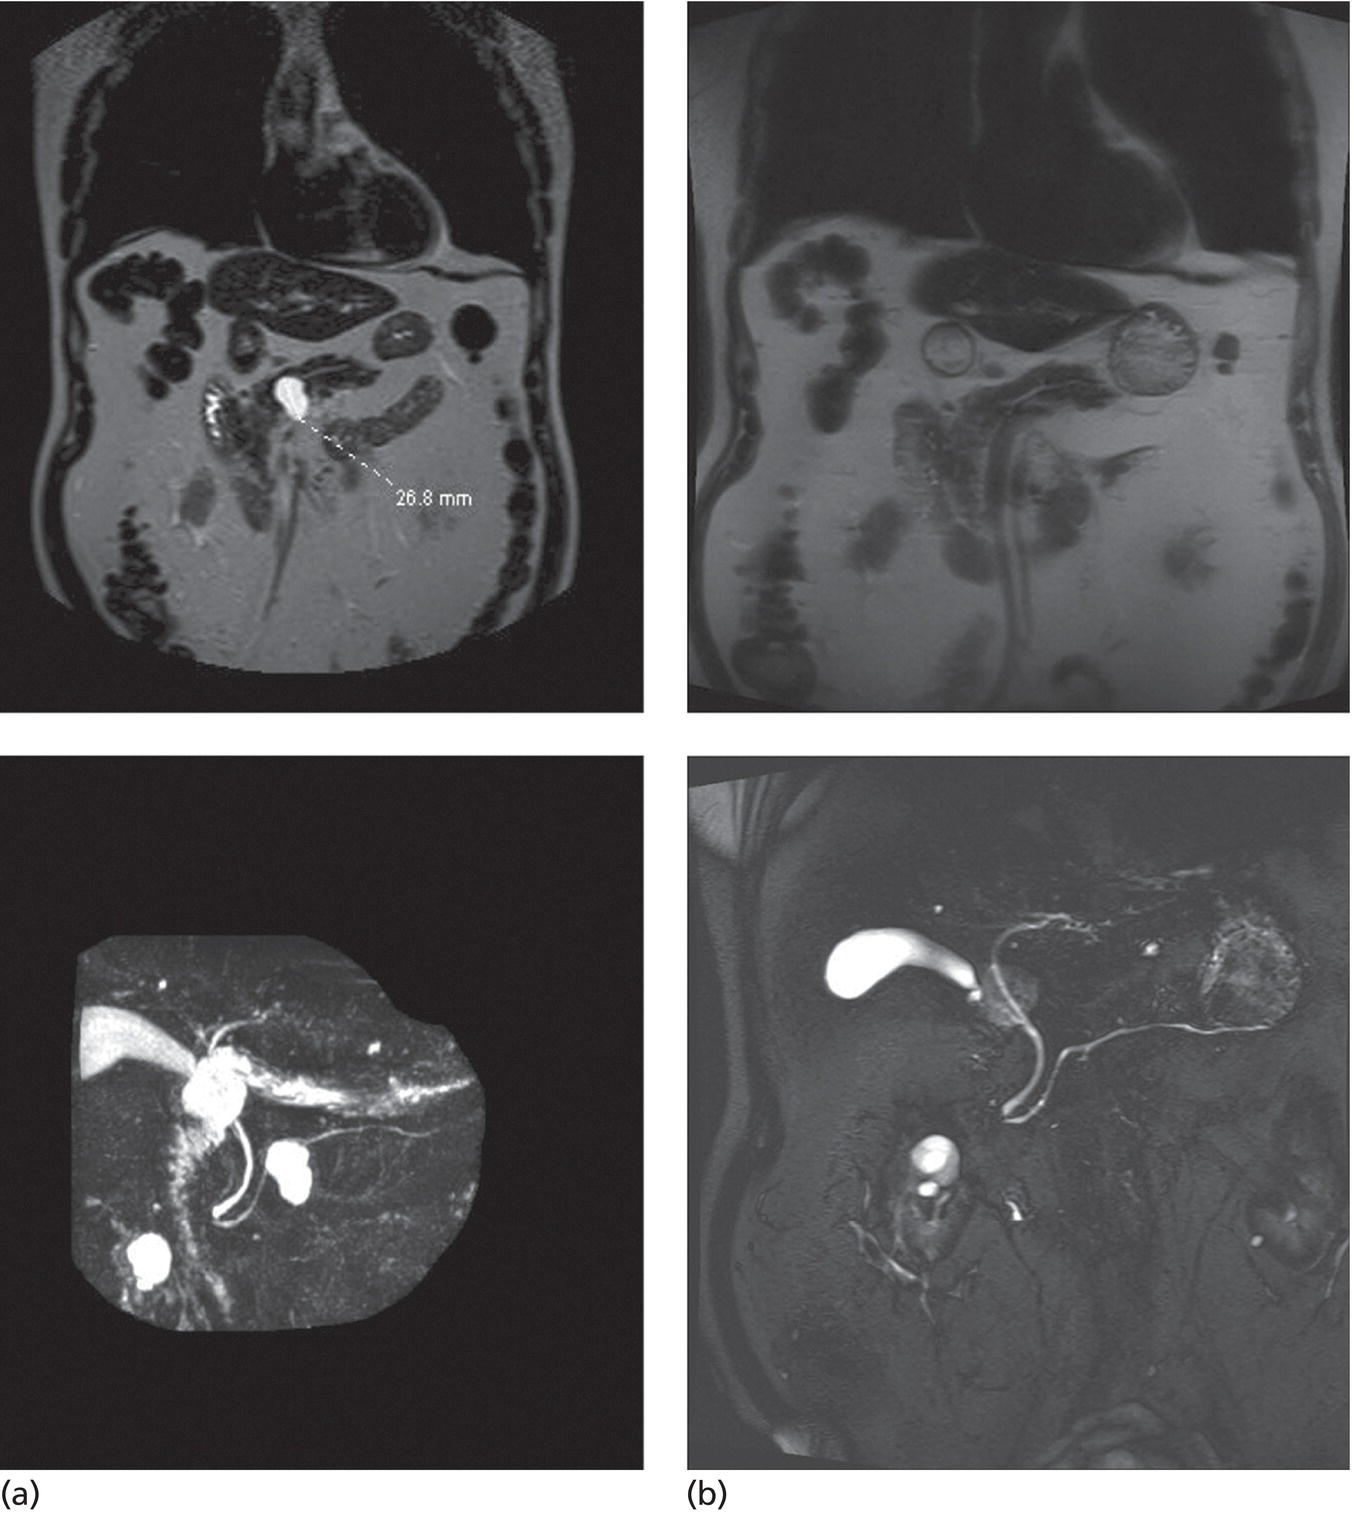 Photos depict (a) MRI (top) and magnetic resonance cholangiopancreatography (bottom) of an 83-year-old male with a 2.7-cm intraductal mucinous pancreatic neoplasm prior to EUS-guided chemoablation. (b) Follow-up MRI (top) and MRCP (bottom) reveals no evidence of residual cyst at six-month follow-up evaluation.